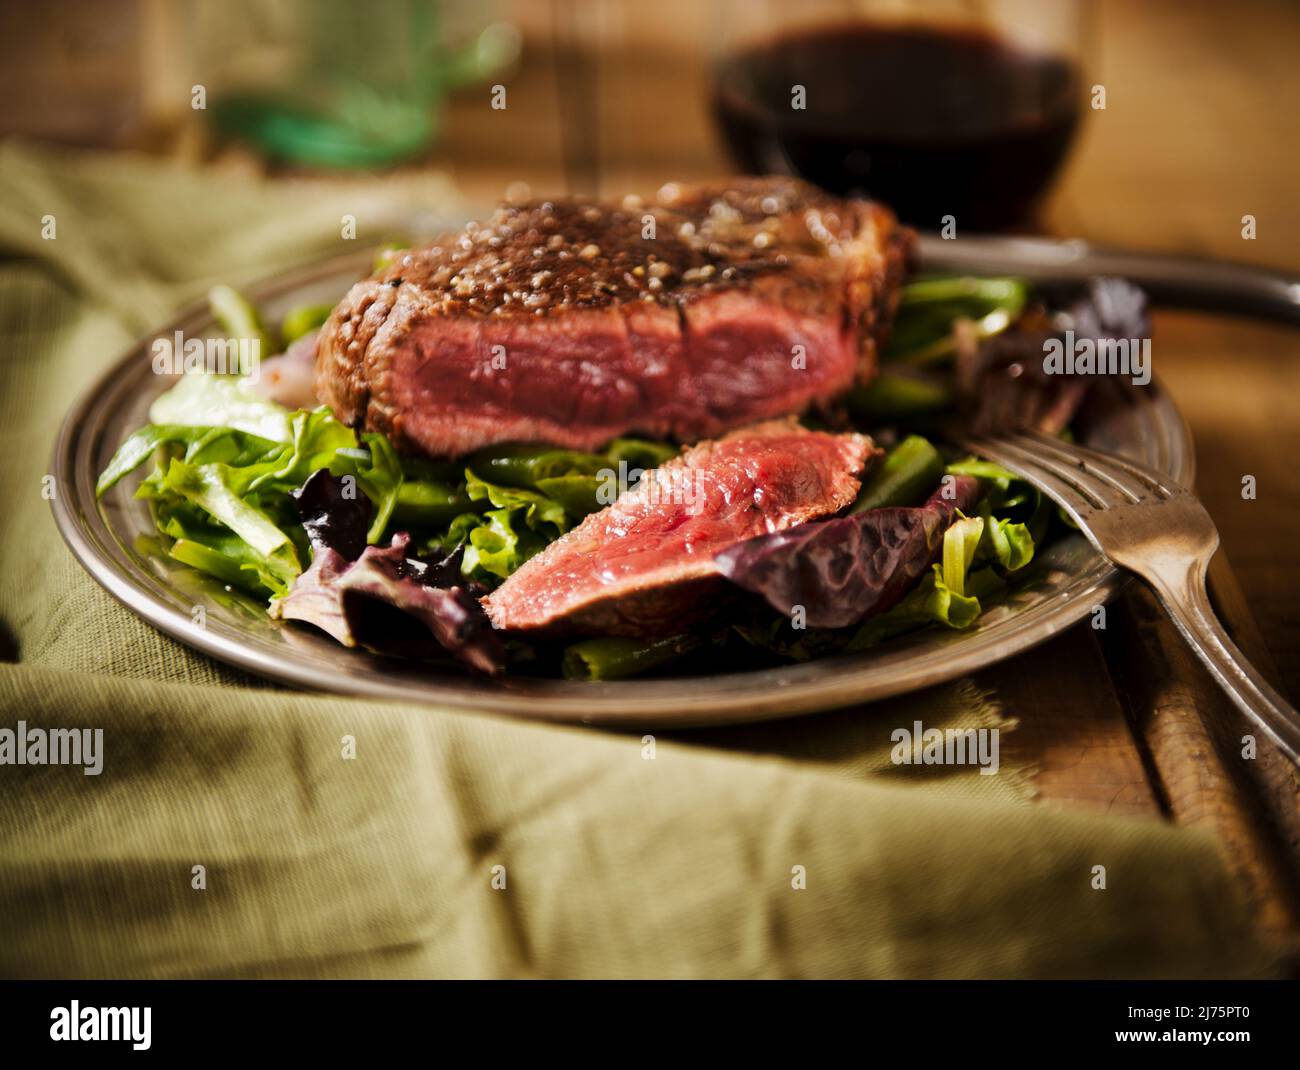 Sliced Grass Fed Sirloin Steak on a Bed of Wine Stock Photo